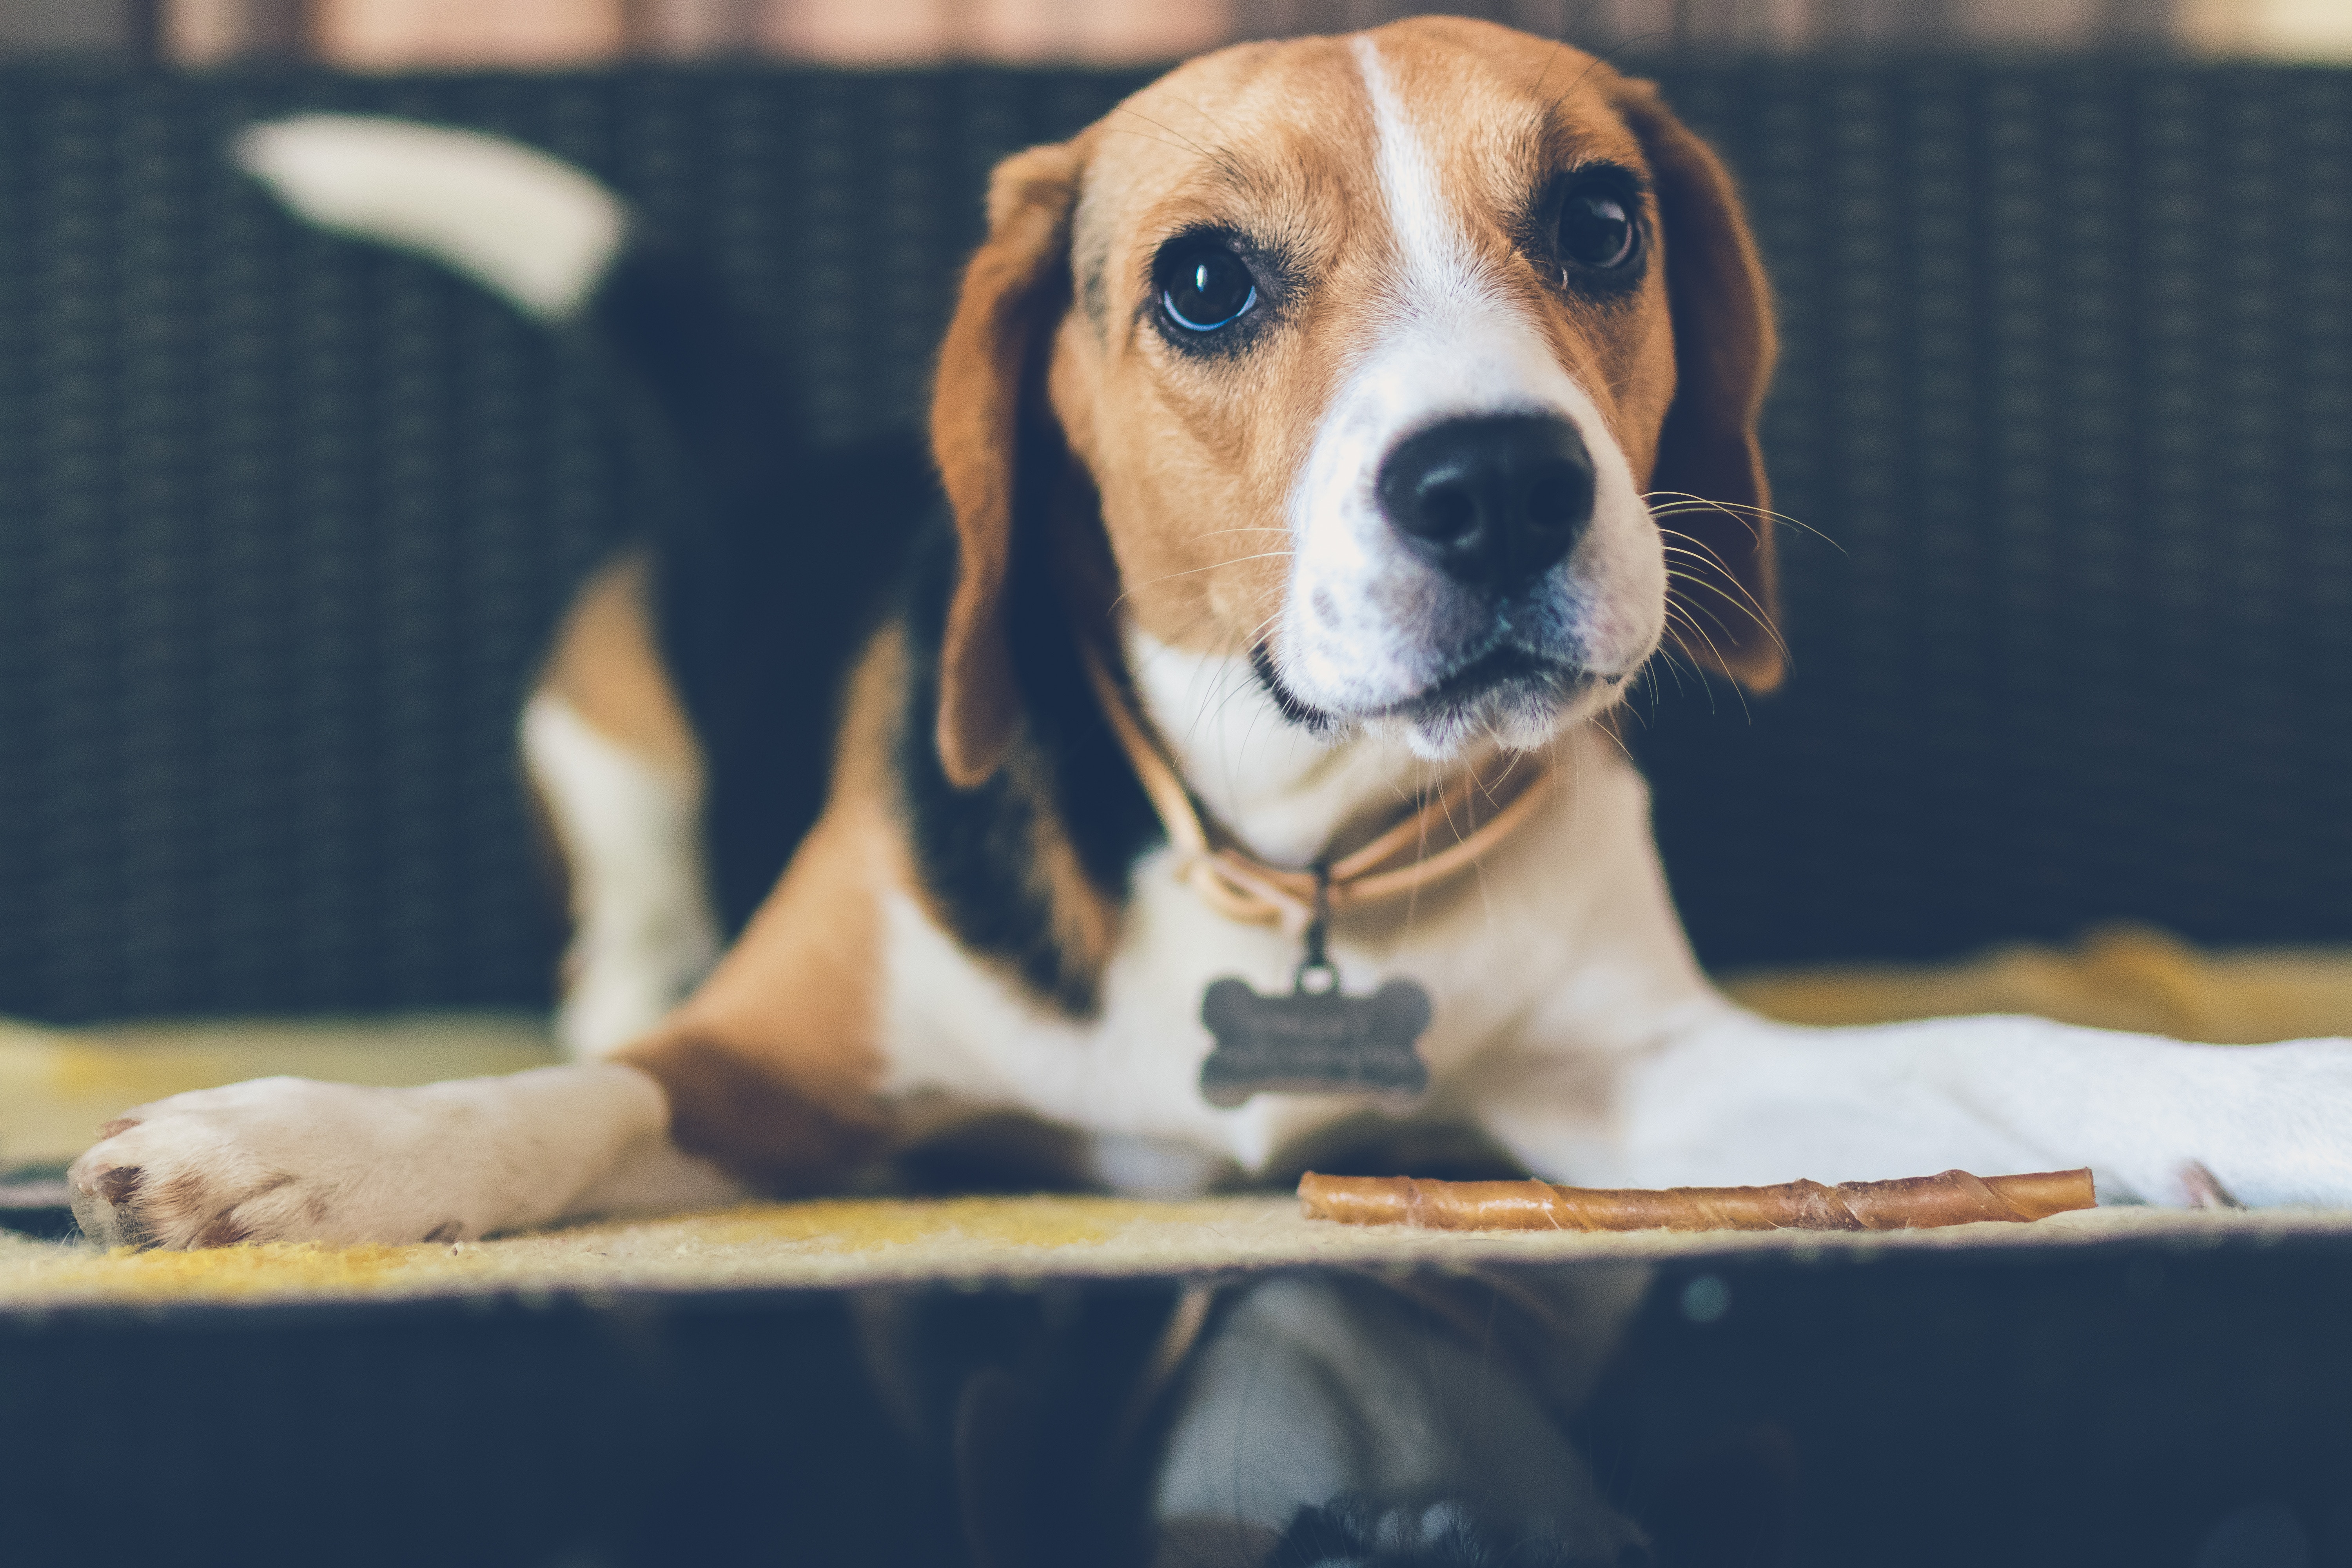 Border Security Beagle Sniffs Out Roasted Pig In Traveler's Luggage